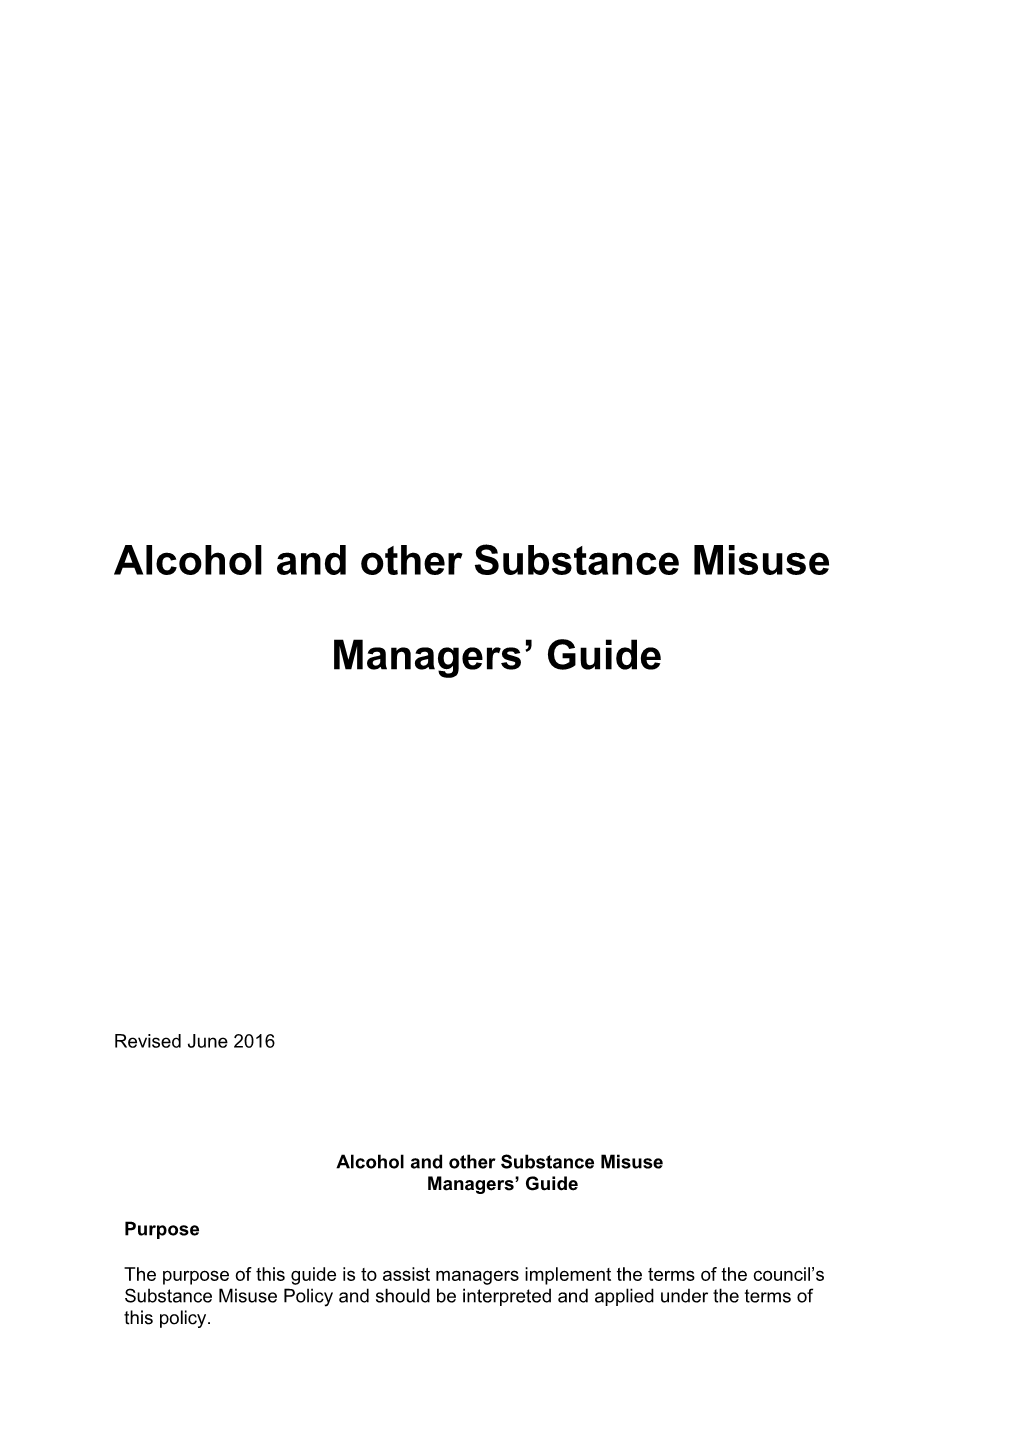 Alcohol and Other Substance Misuse